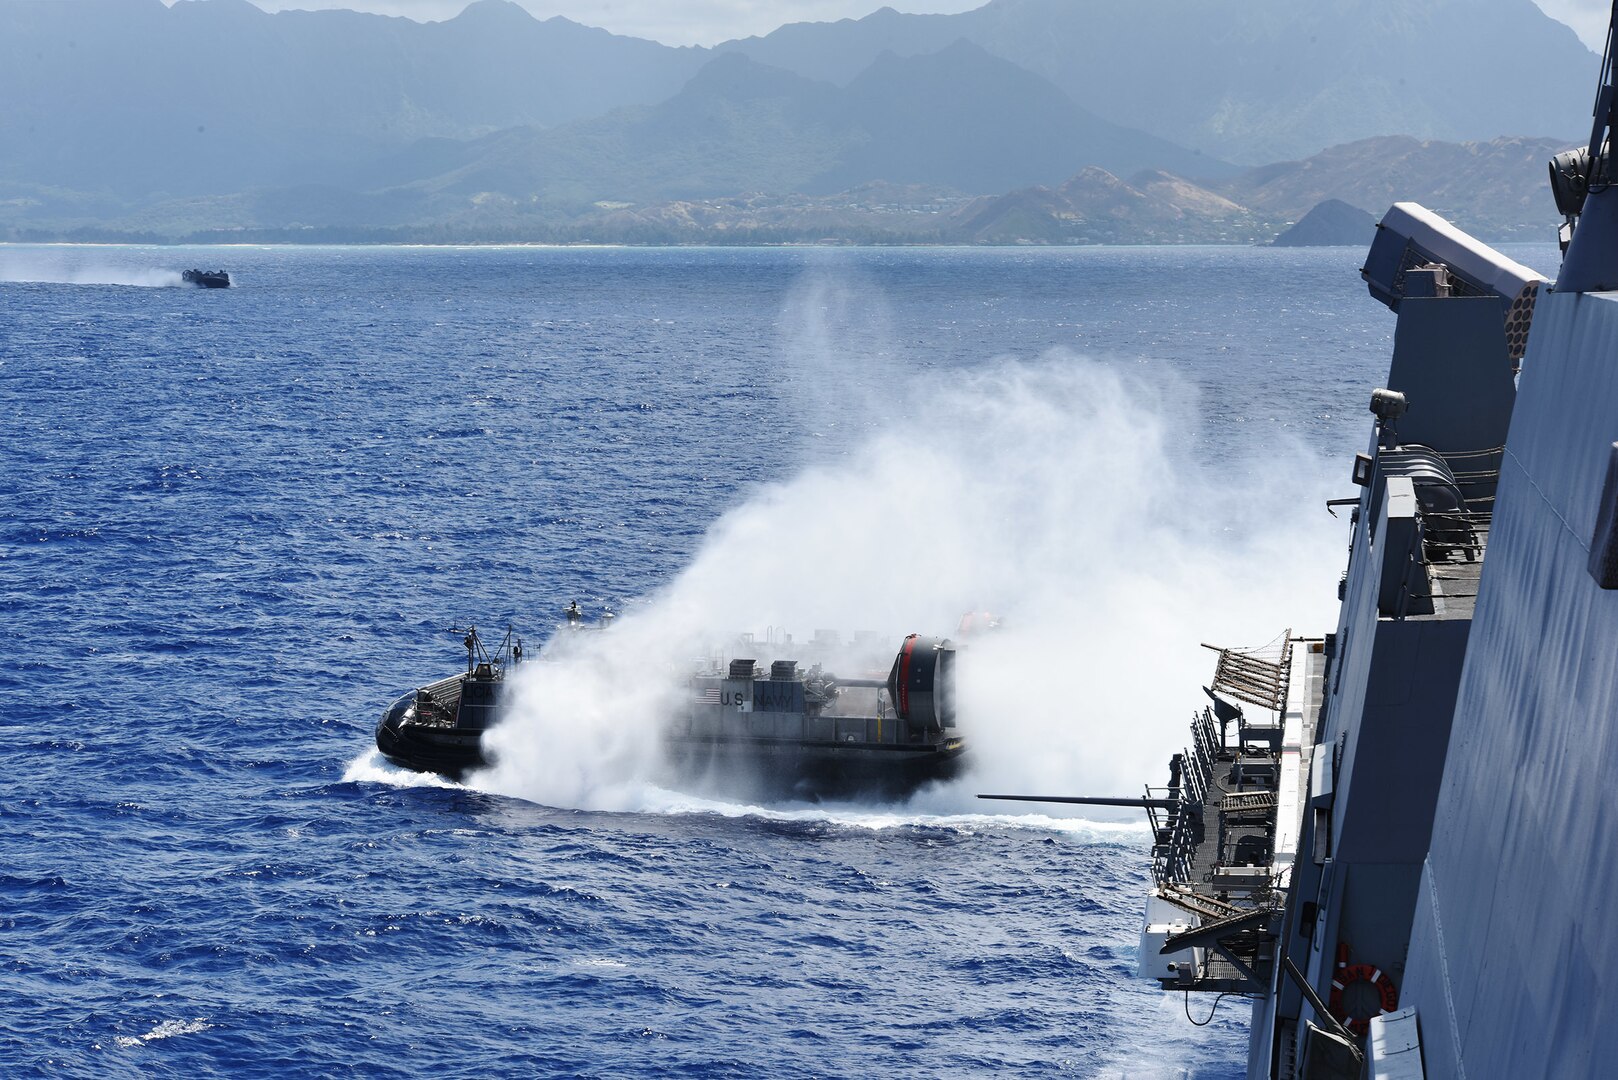 PACIFIC OCEAN (July 14, 2017) - A landing craft, air cushion, assigned to Assault Craft Unit 5, departs the well deck of the amphibious transport dock ship USS San Diego (LPD 22), during amphibious operations as part of a sustainment exercise. San Diego is embarked on a scheduled deployment as part of the America Amphibious Ready Group, which is comprised of more than 1,800 Sailors and 2,600 Marines assigned to the amphibious assault ship USS America (LHA 6), the amphibious dock landing ship USS Pearl Harbor (LSD 52) and San Diego. (U.S. Navy photo by Mass Communication Specialist 1st Class Joseph M. Buliavac/Released)